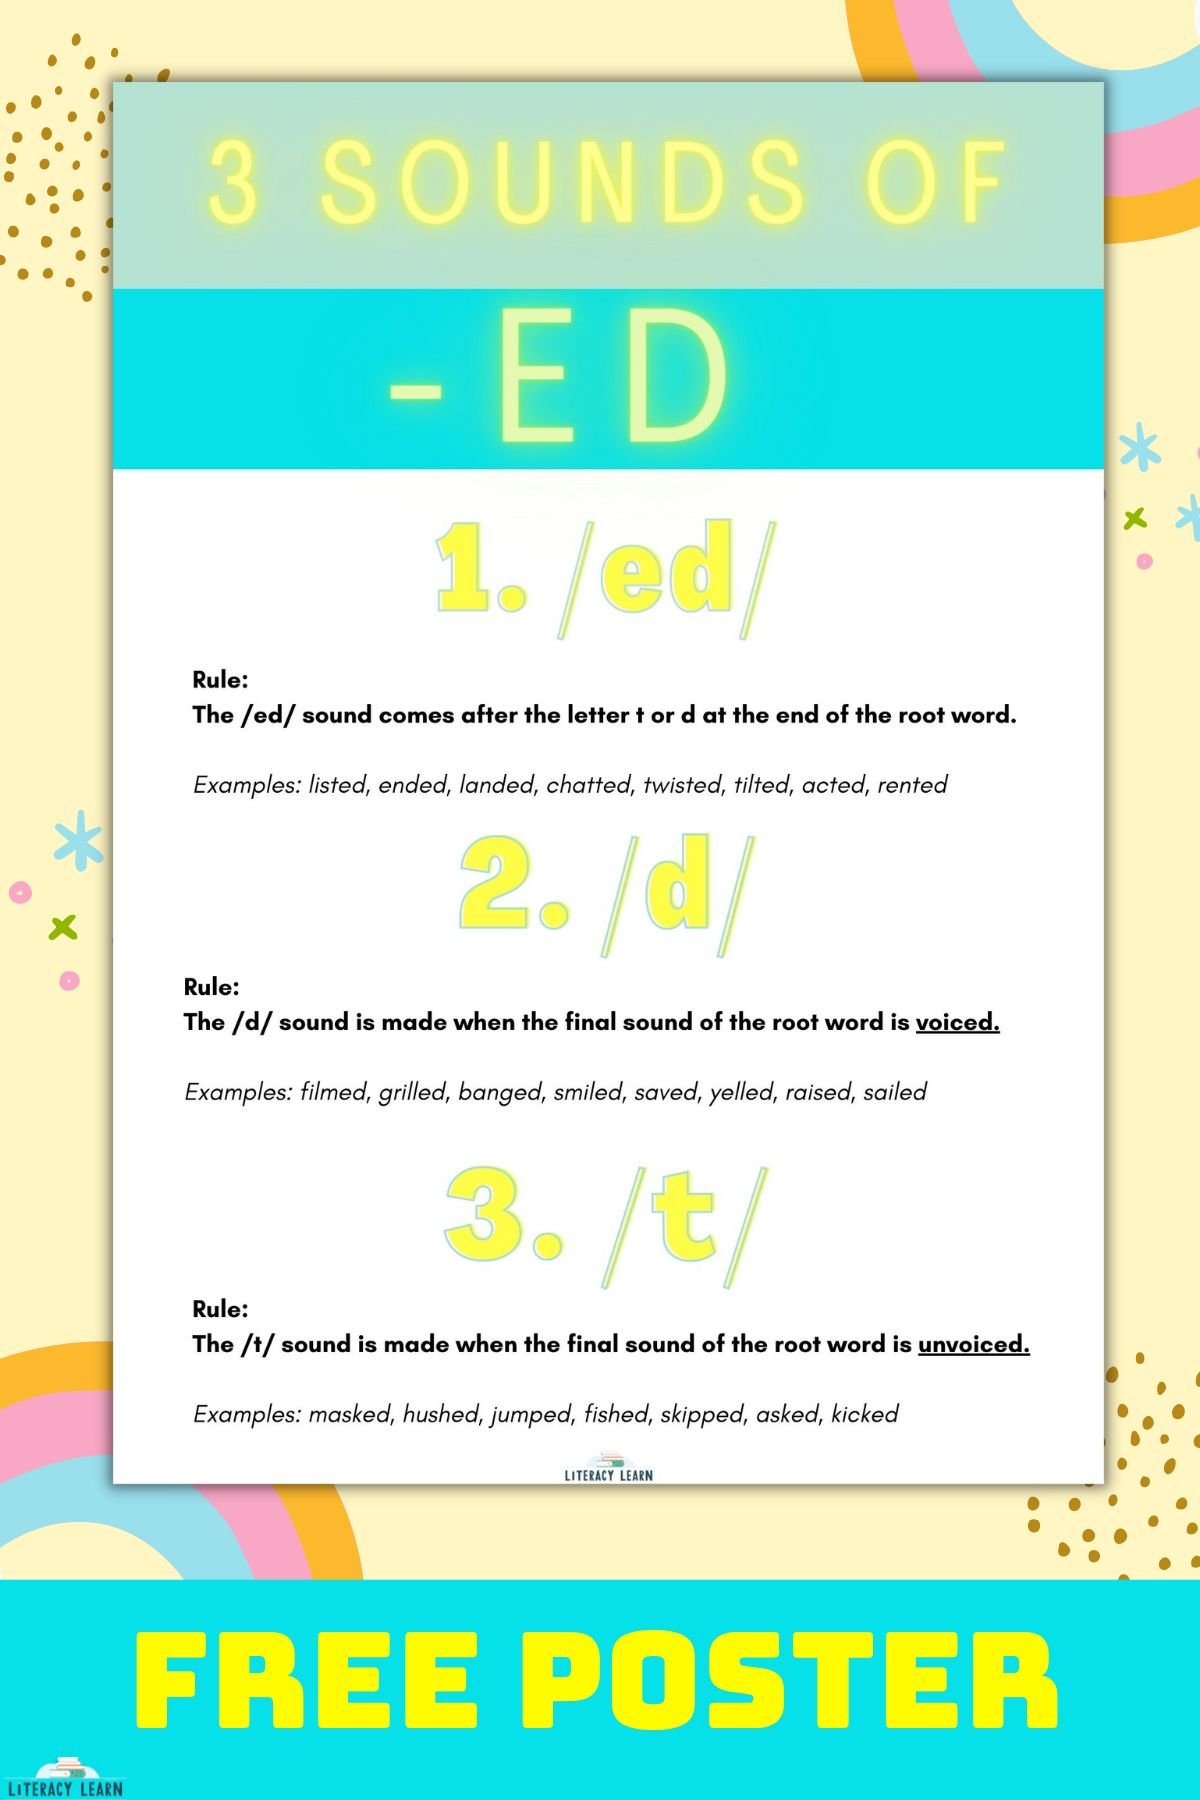 Graphic with "Free Poster" and the poster showing 3 sounds of suffix - ed. 